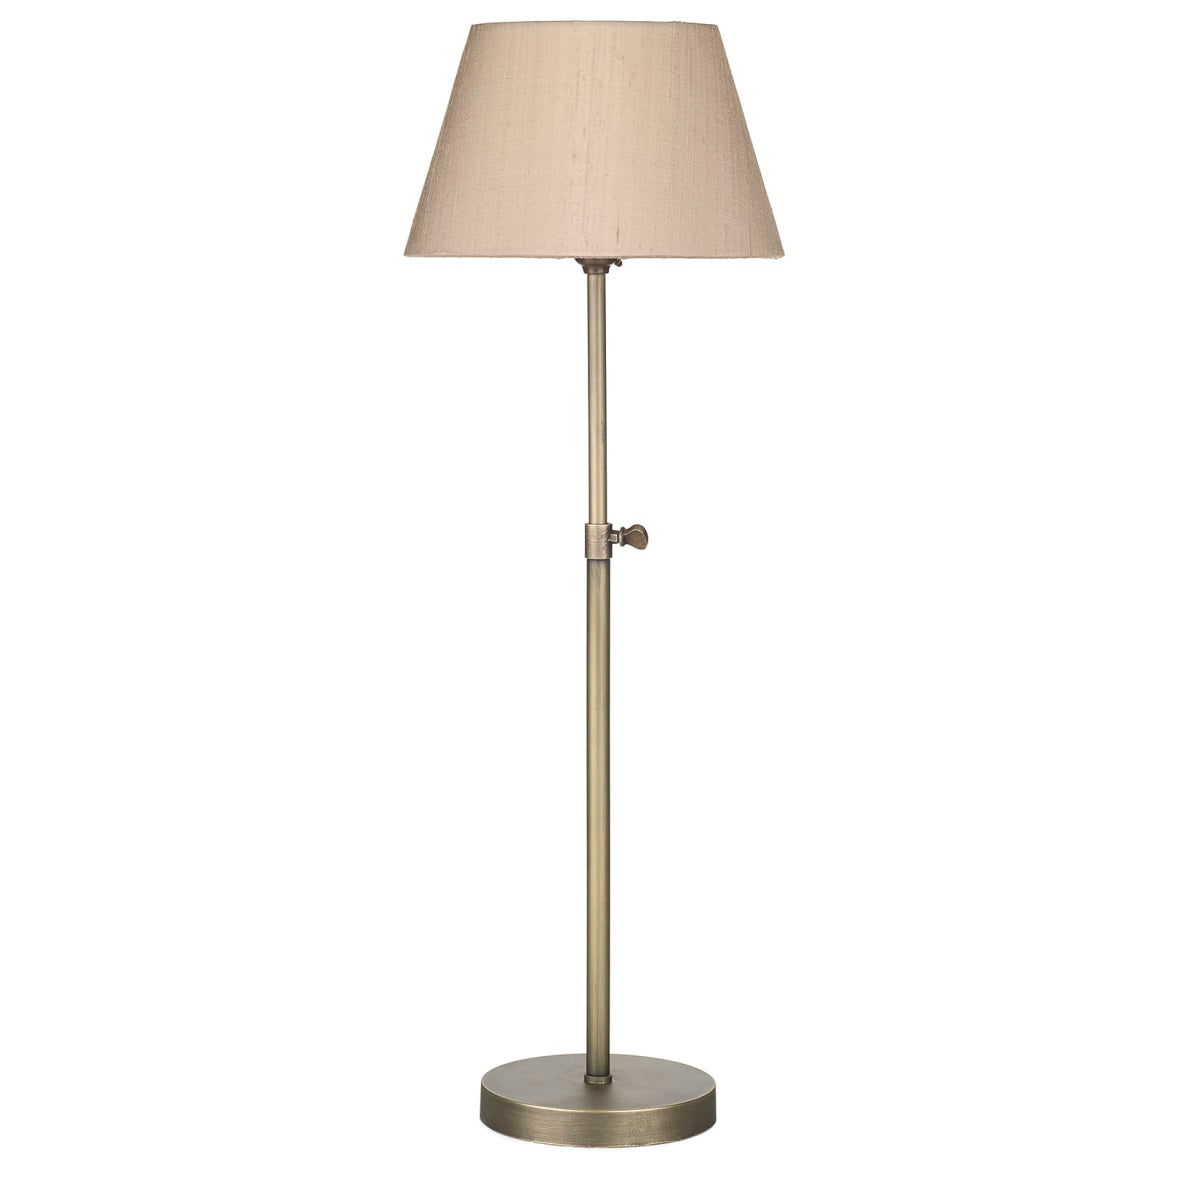 The hicks table lamp base is a single simple stem lamp finished in antique brass with a single gas button decorative feature on the side, the lamp base is smooth and flat and circular, designed on the old retro gas lamps its a simple timeless design, we show it here with a neutral taupe shade that is tapered from the top to bottom of the shade, it is 20cm diam at the bottom of the shade and is not included in the price of the lamp but it can be ordered additionally with a huge choice of colours available.